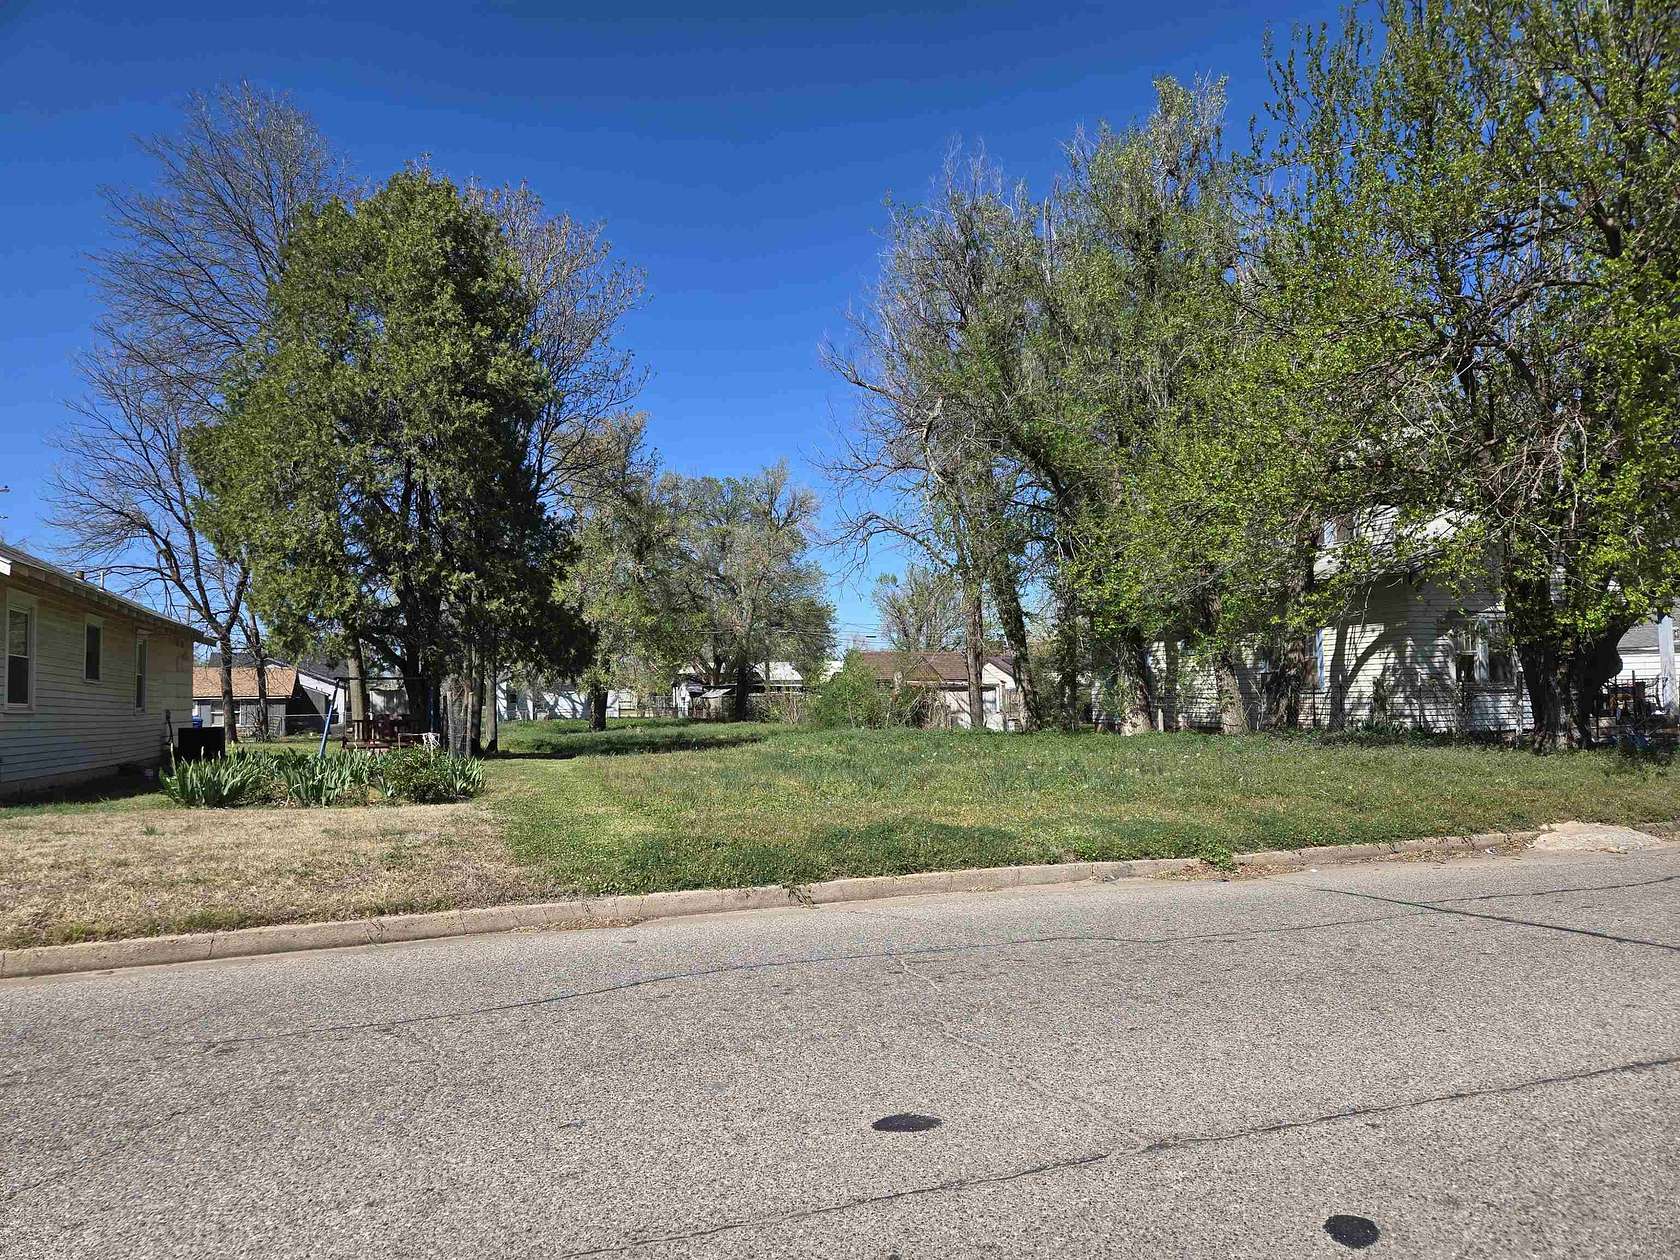 Land for Sale in Enid, Oklahoma